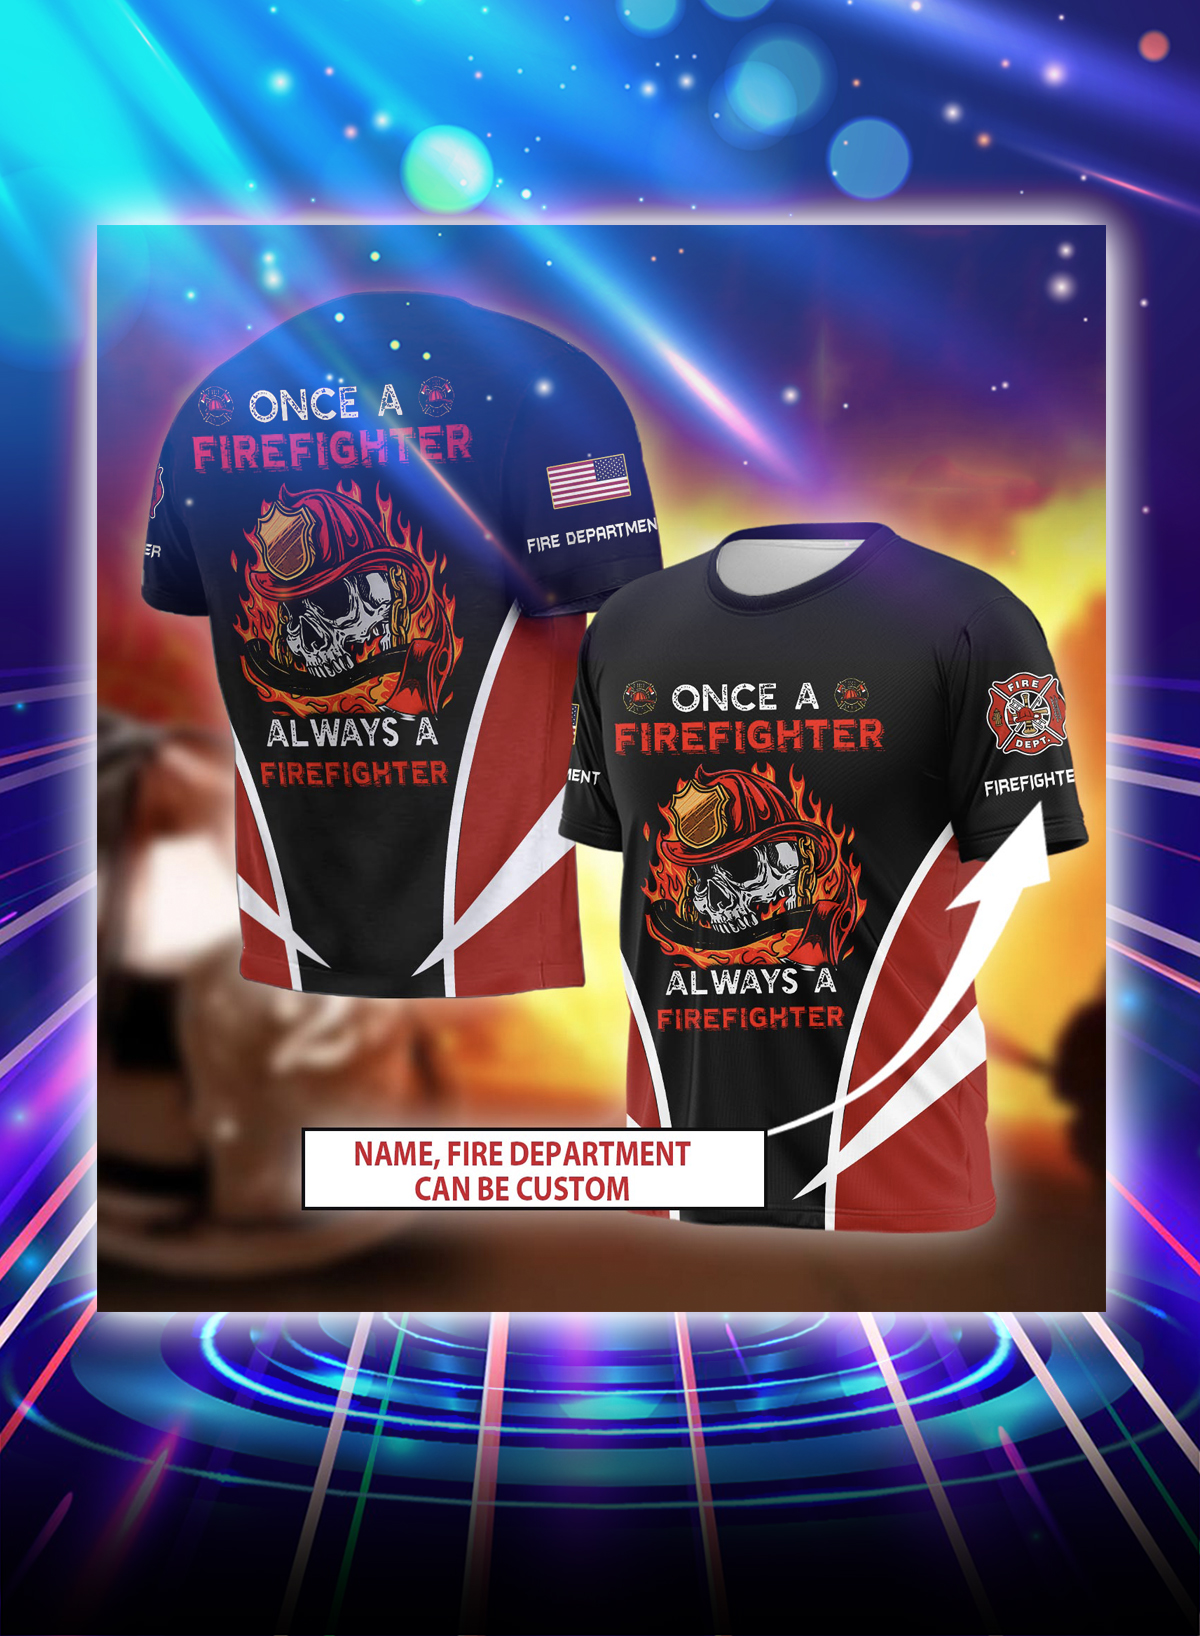 Once a firefighter always a firefighter personalized custom name 3d shirt